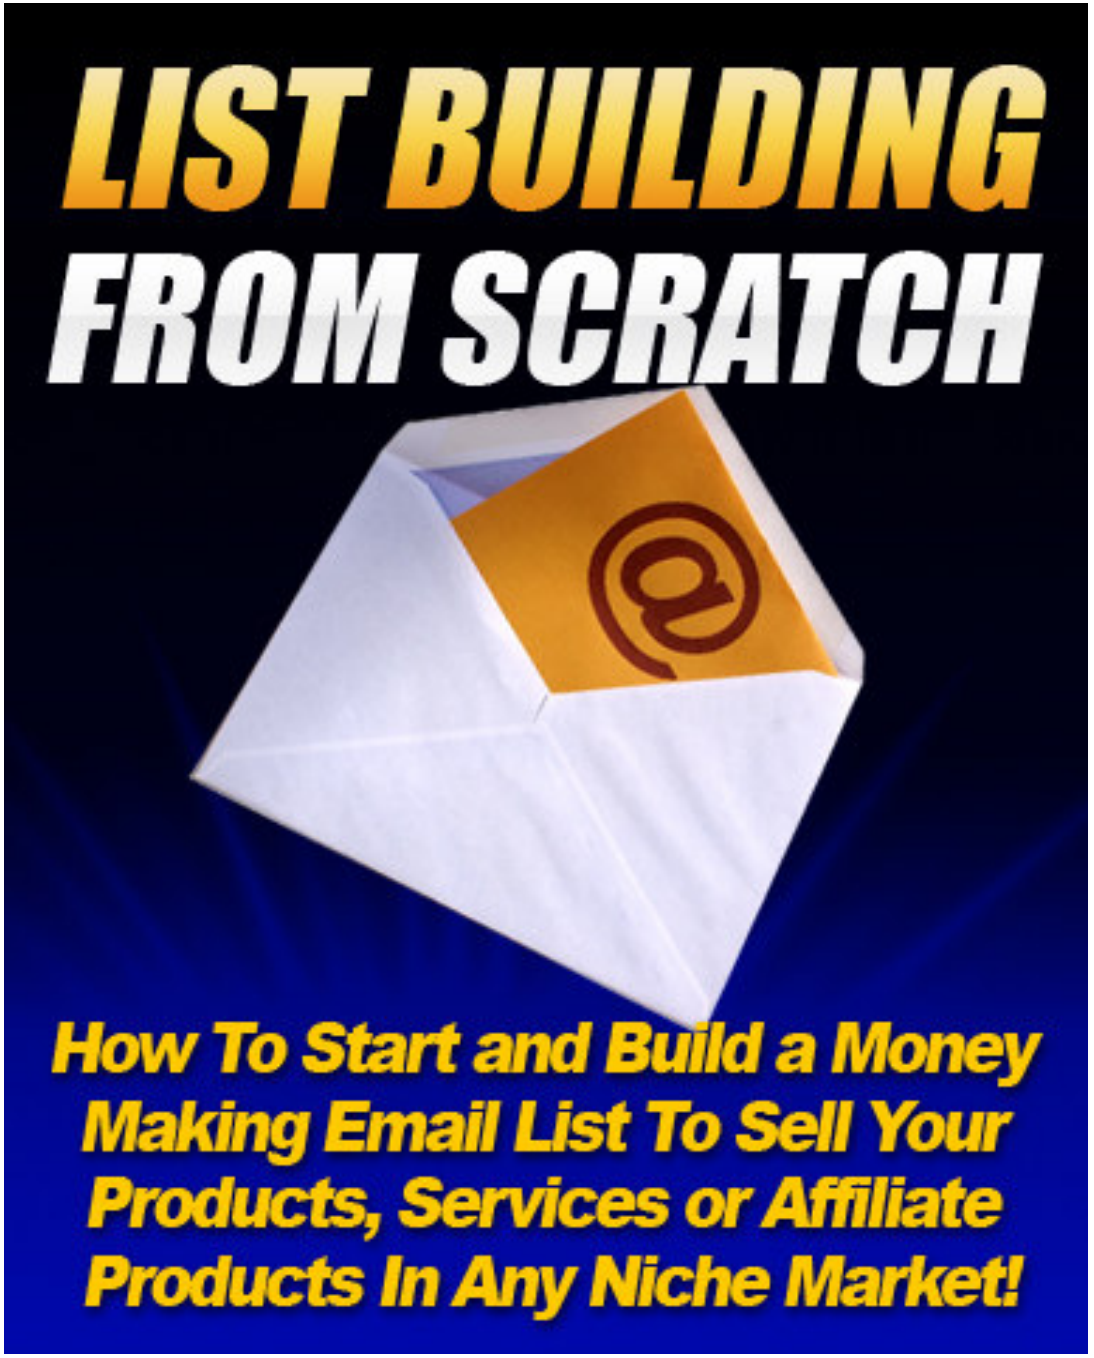 List Building From Scratch